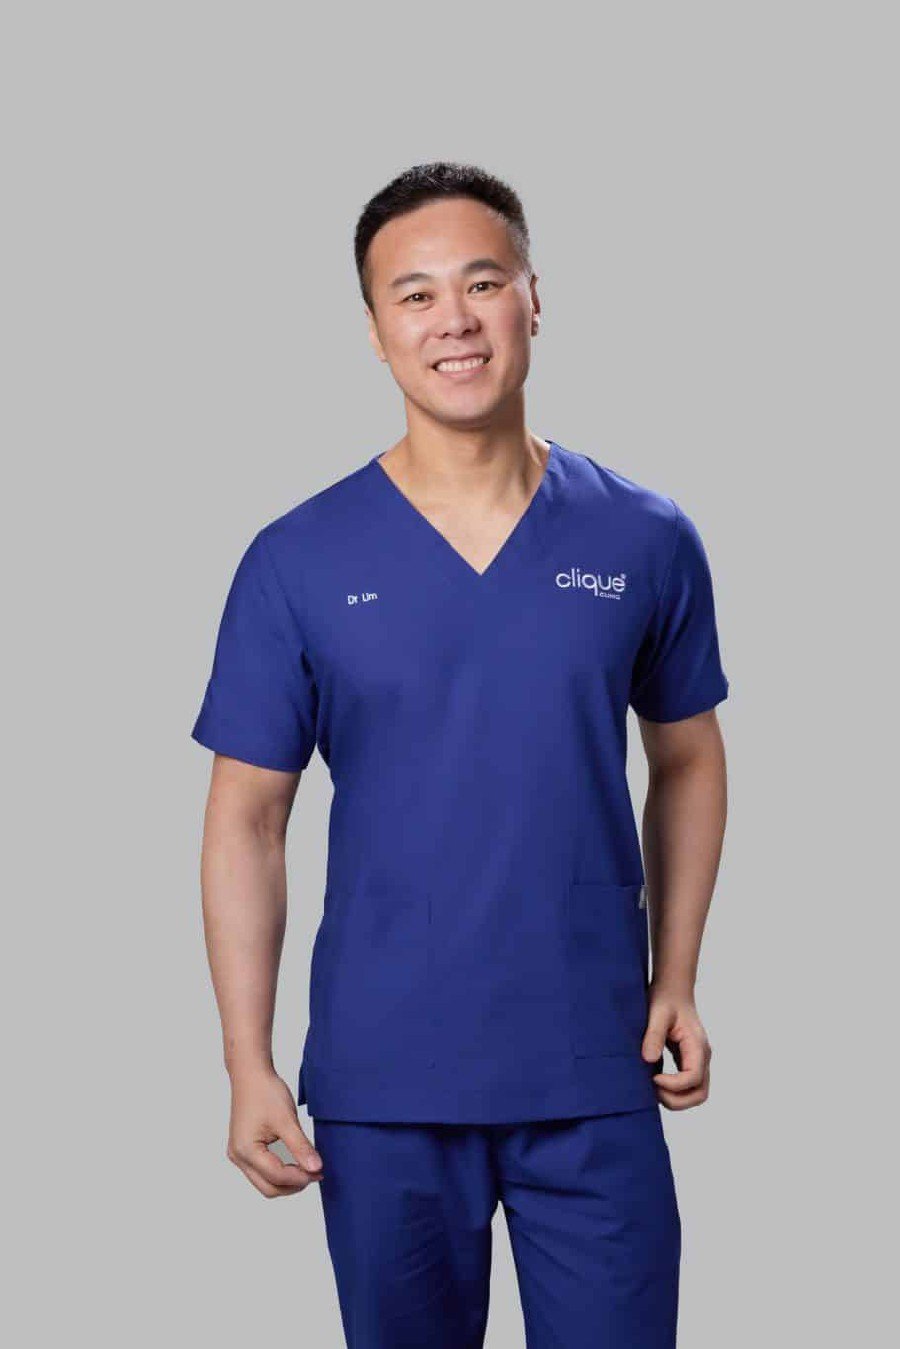 Clique Clinic medical director Dr Ting Song Lim says invasive treatments are those that entail penetrating the body's tissues through incisions, punctures, or other methods that breach the skin or mucous membranes.